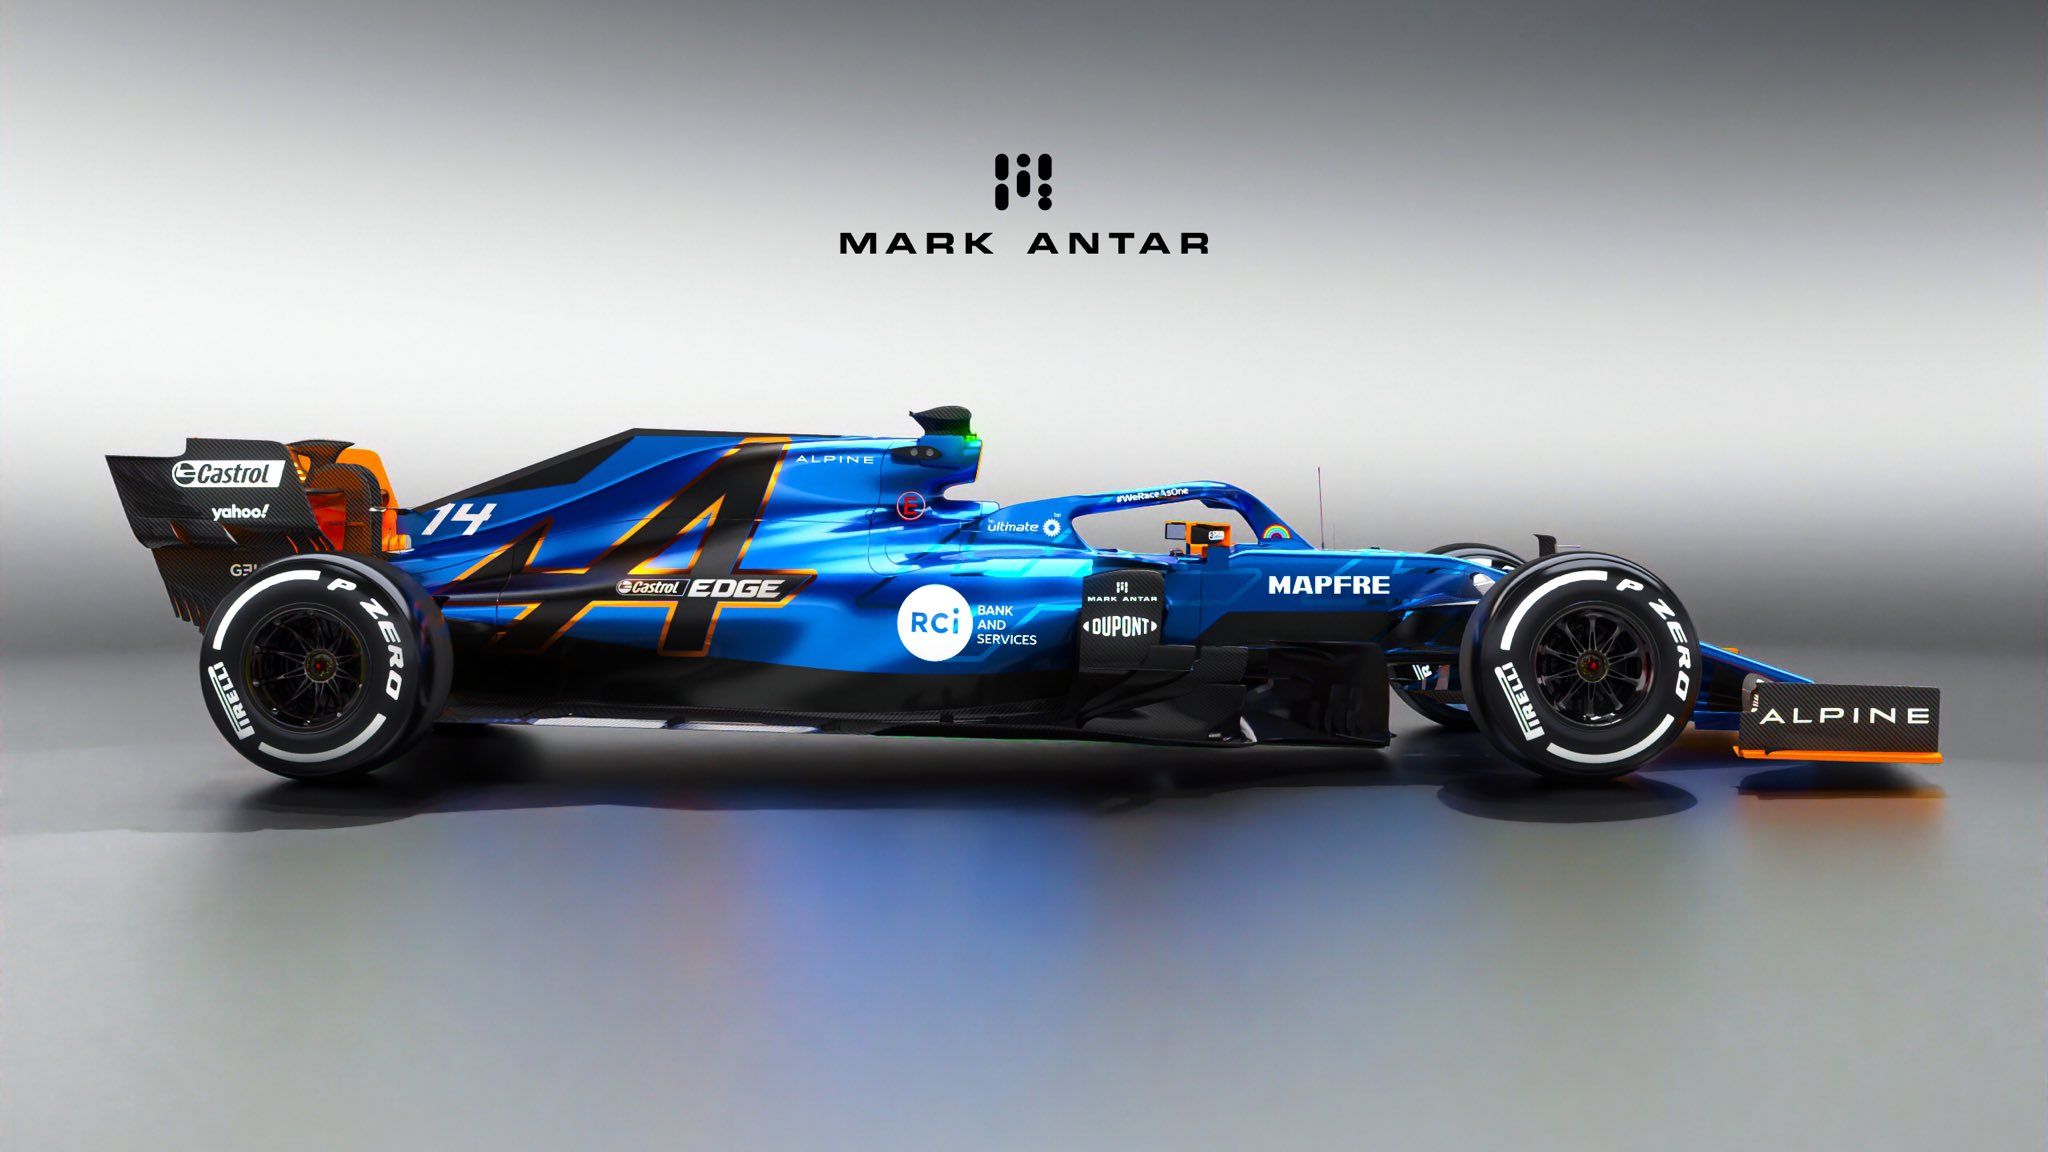 Mark Antar Design F1 will be rebranded as Alpine F1 for the 2021 season! Here's my take on a 2021 Alpine F1 livery using the brand's original colours!